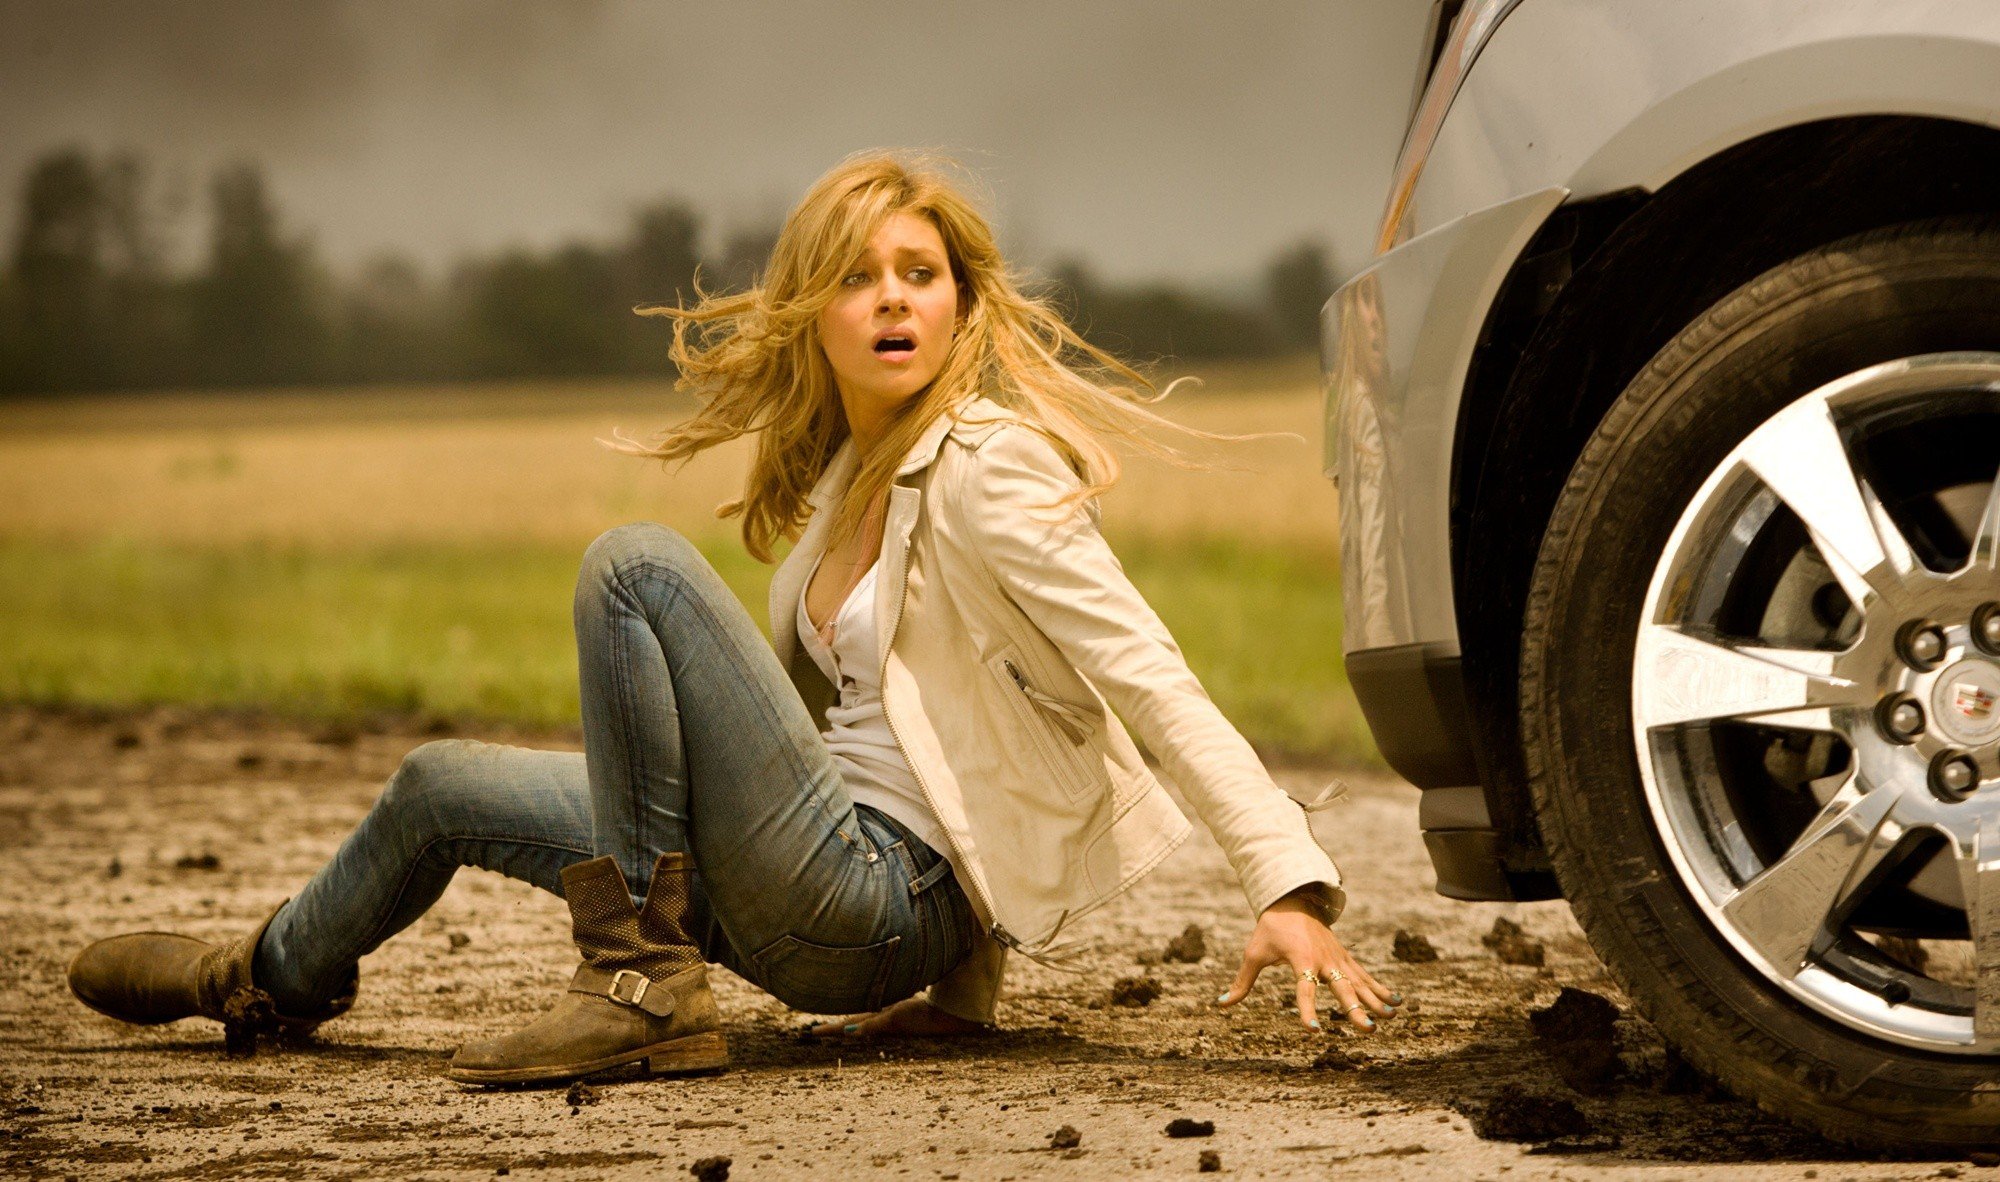 Nicola Peltz stars as Tessa Yeager in Paramount Pictures' Transformers: Age of Extinction (2014)